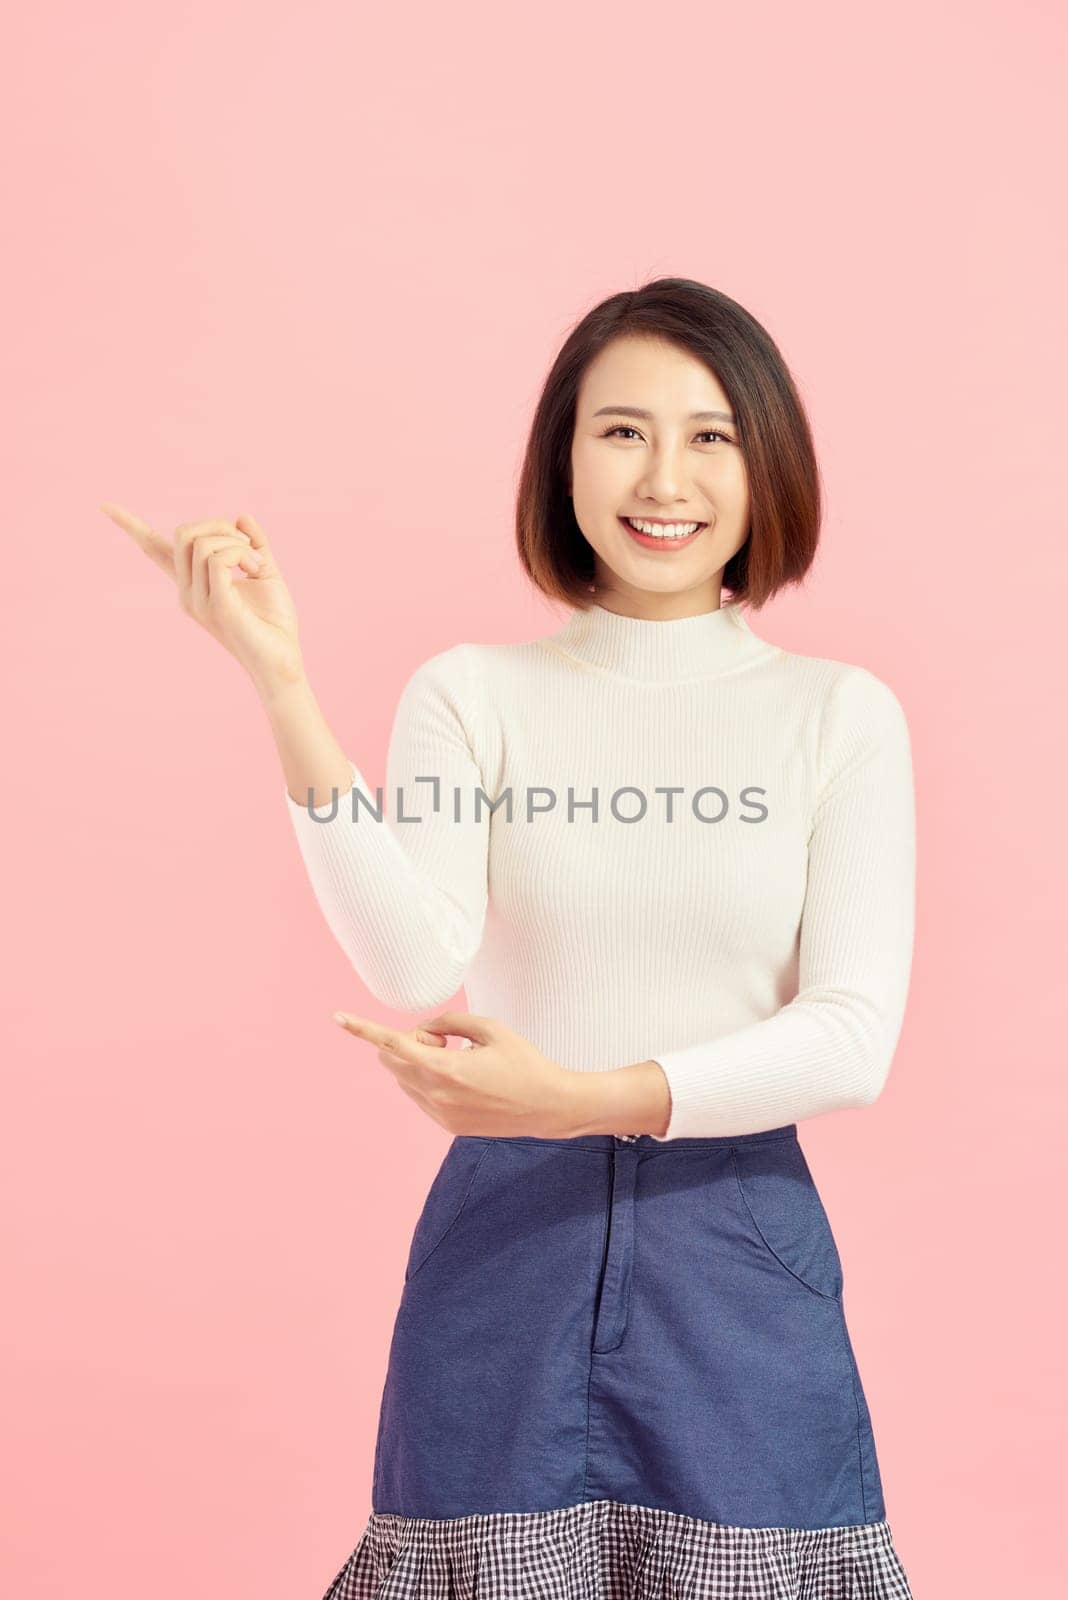 Businesswoman pressing button or something. Isolated on pink background